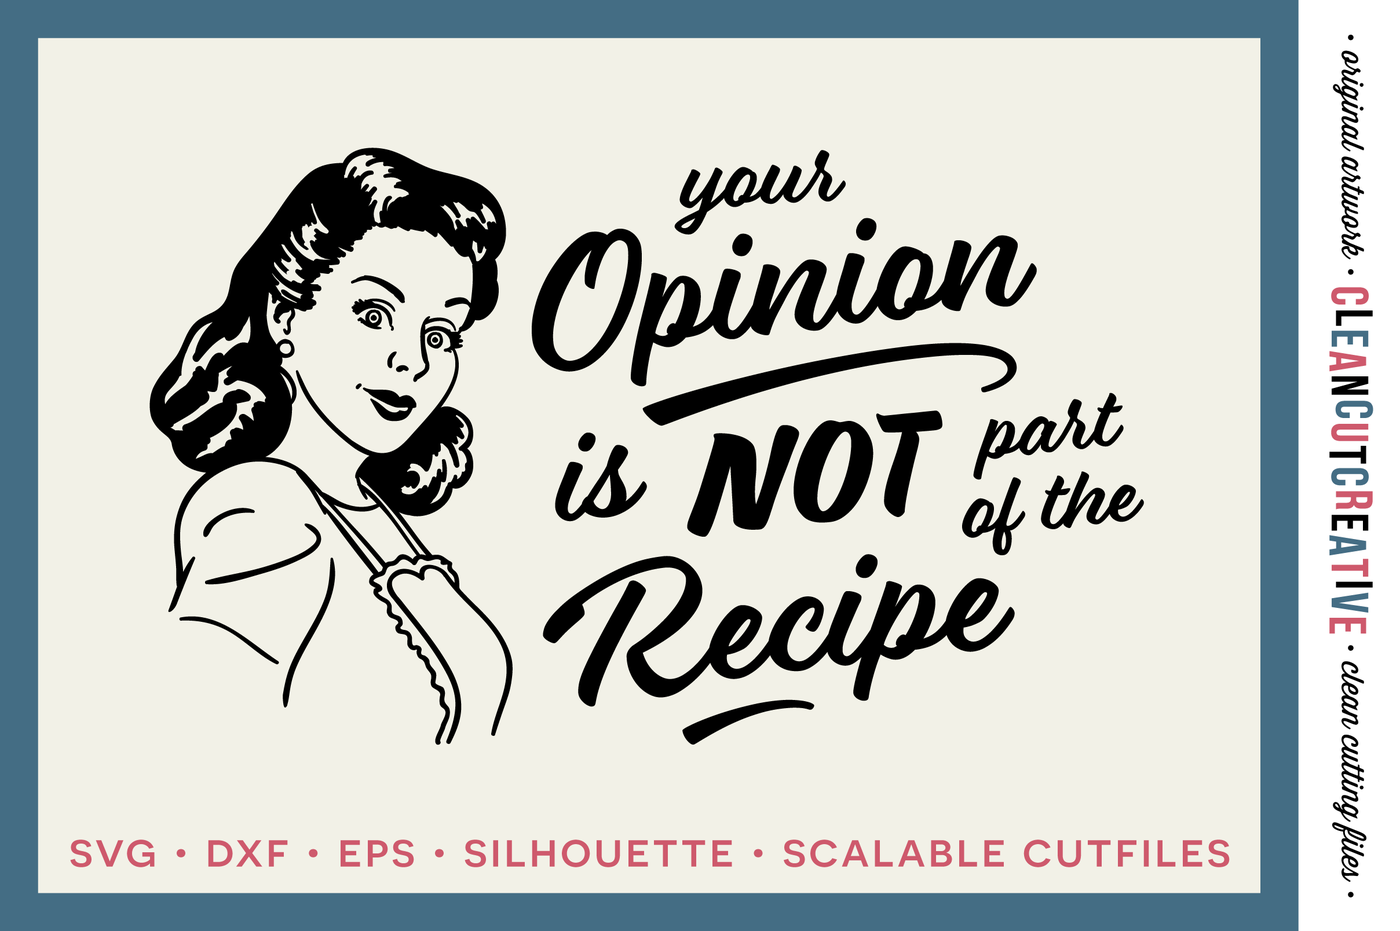 YOUR OPINION IS NOT PART OF THE RECIPE! Funny Kitchen quote with retro